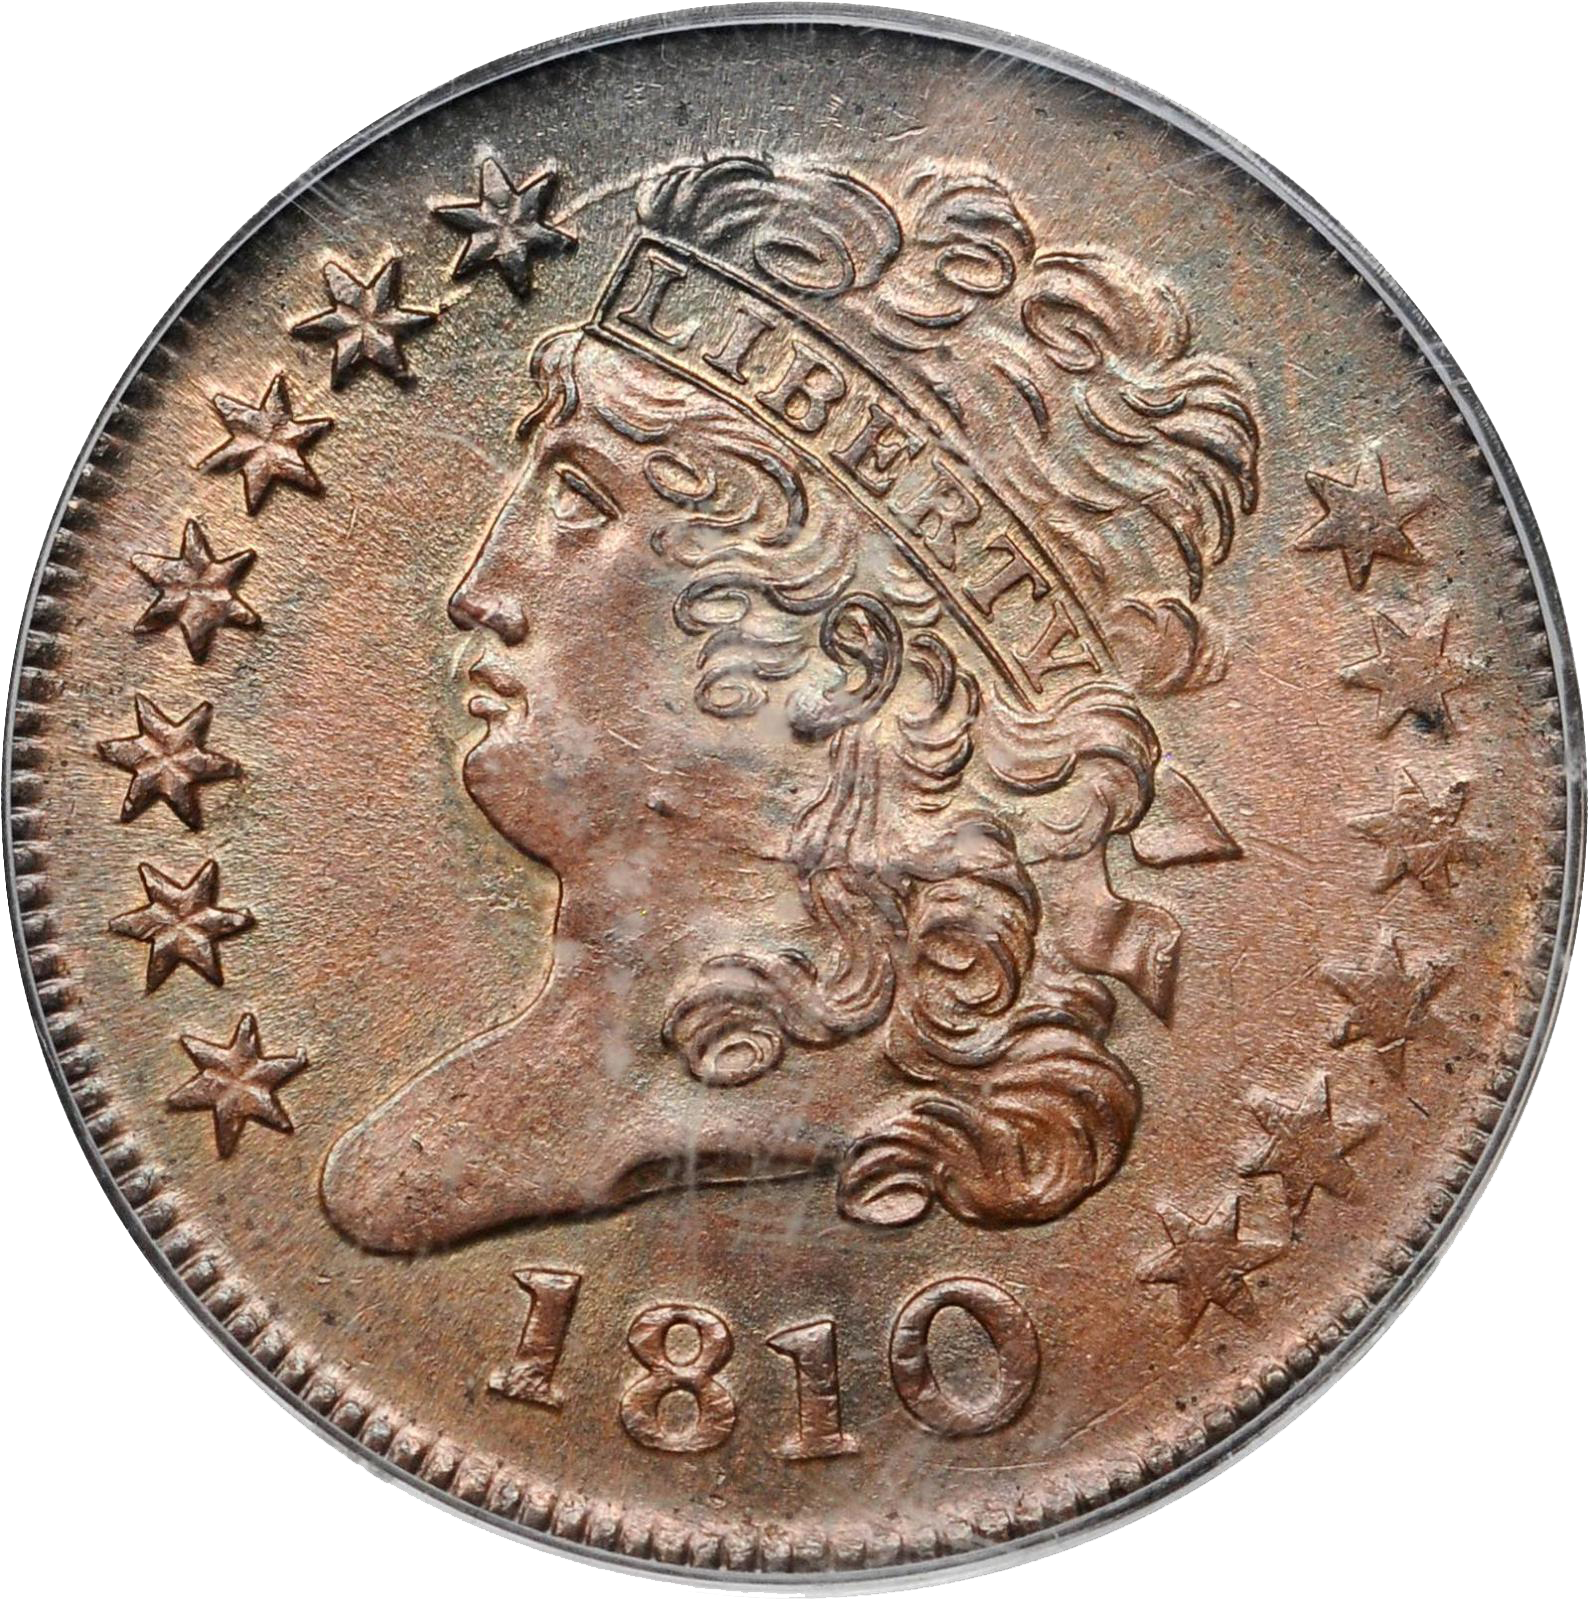 Value Of 1810 Classic Head Half Cent Rare Coin Buyers